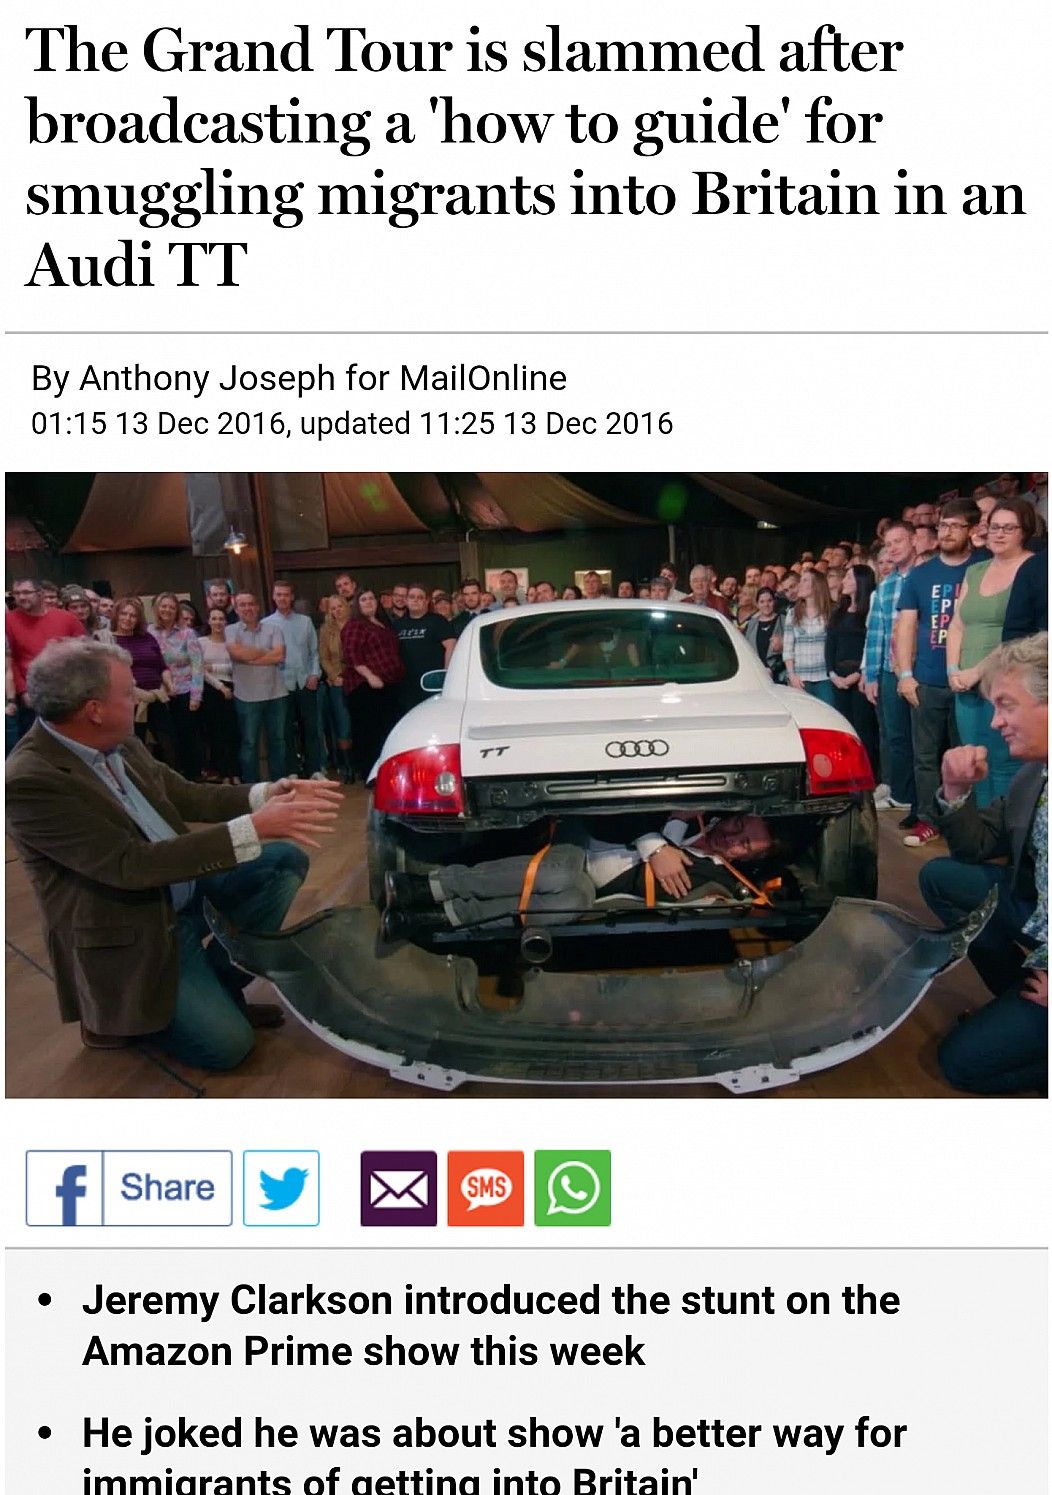 If they own an Audi TT, let them in